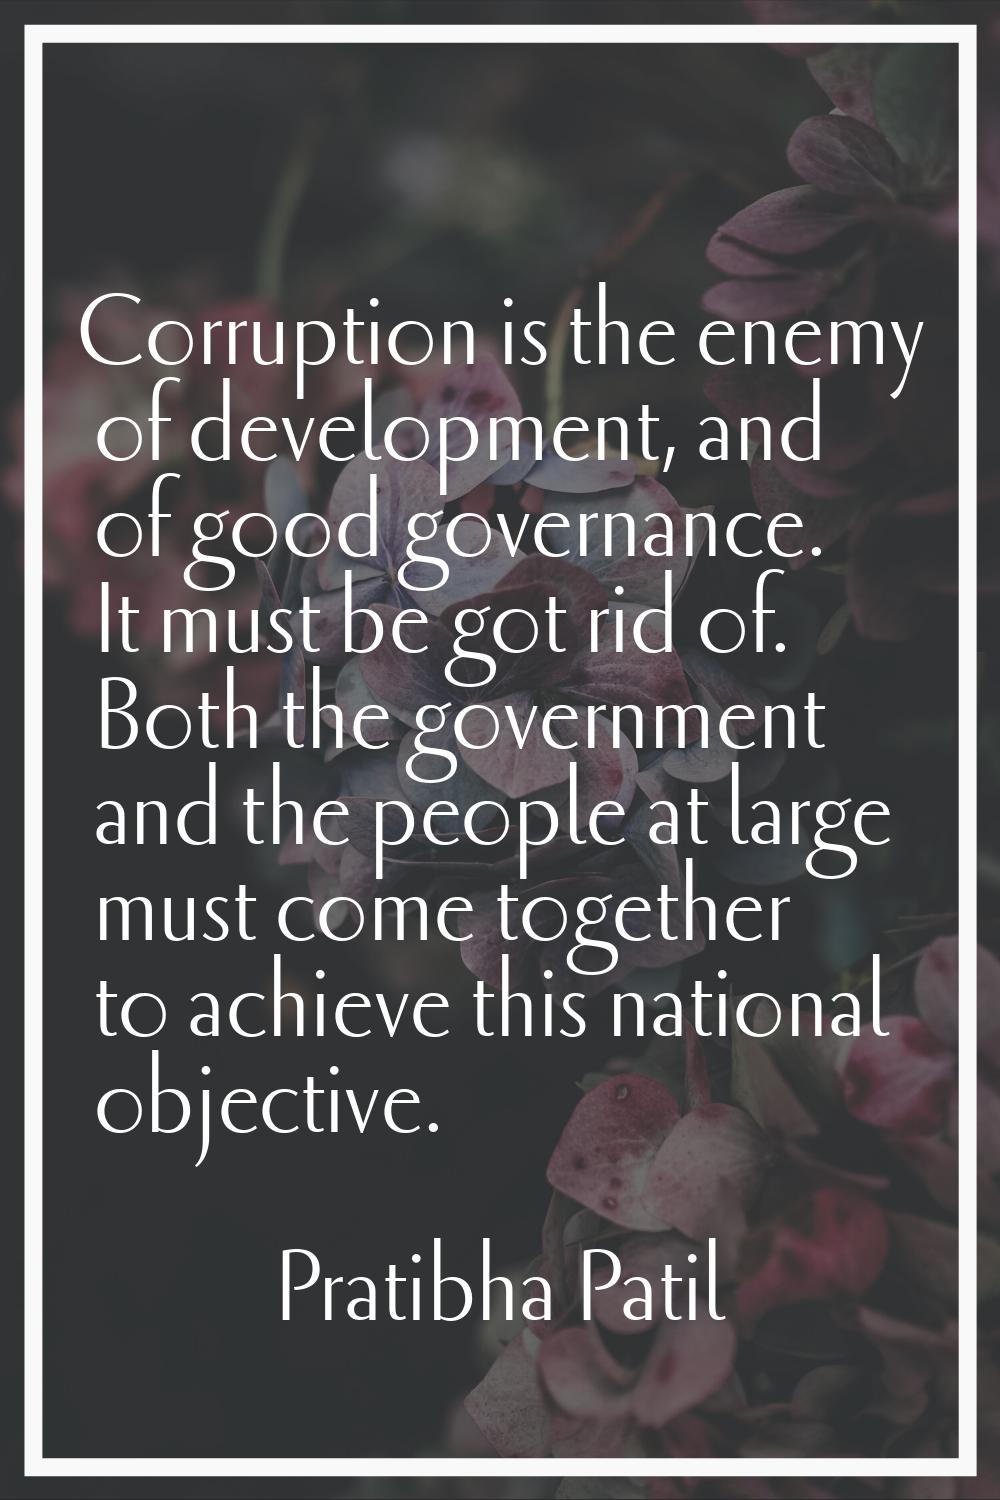 Corruption is the enemy of development, and of good governance. It must be got rid of. Both the gov